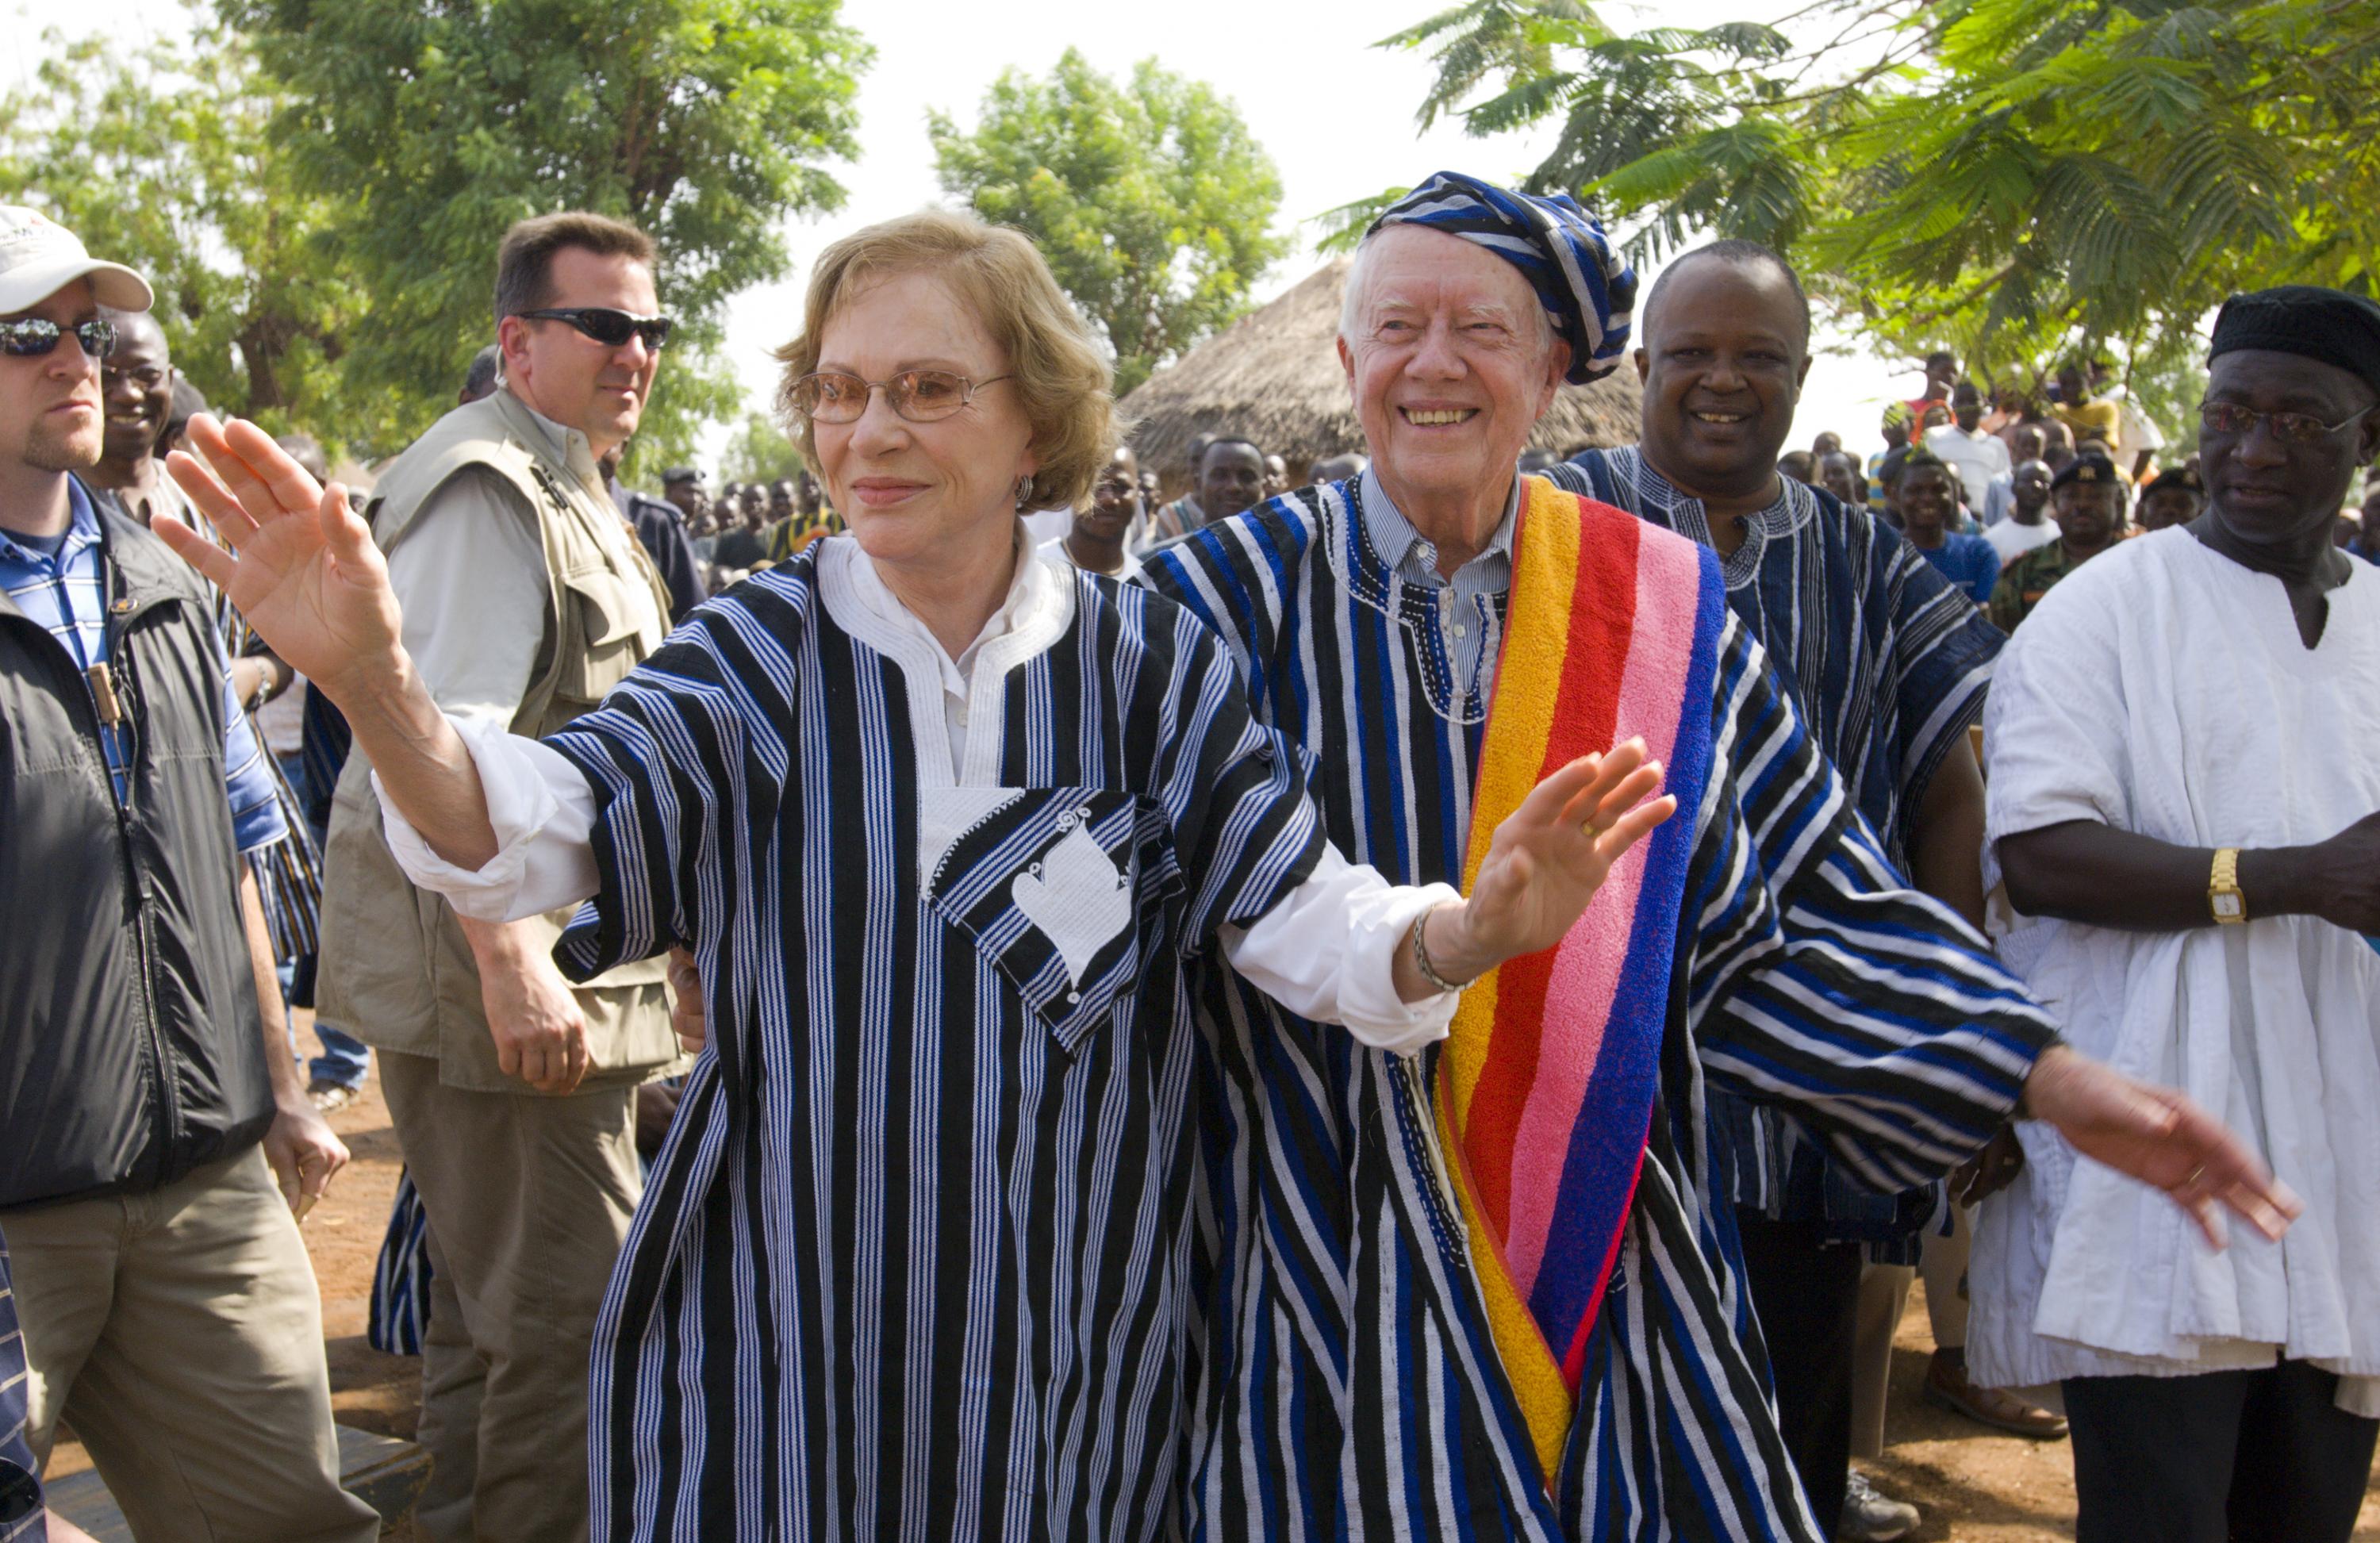 Former U.S. President Jimmy Carter and former First Lady Rosalynn Carter wear traditional Ghanaian attire, a gift from the chief of Tingoli village in northern Ghana, where The Carter Center, in partnership with Ghana's Ministry of Health, worked to eradicate Guinea worm disease and eliminate trachoma. The Carters visited the village Feb. 8, 2007, as part of a two-week health tour of remote African villages. Photo credit: The Carter Center. 